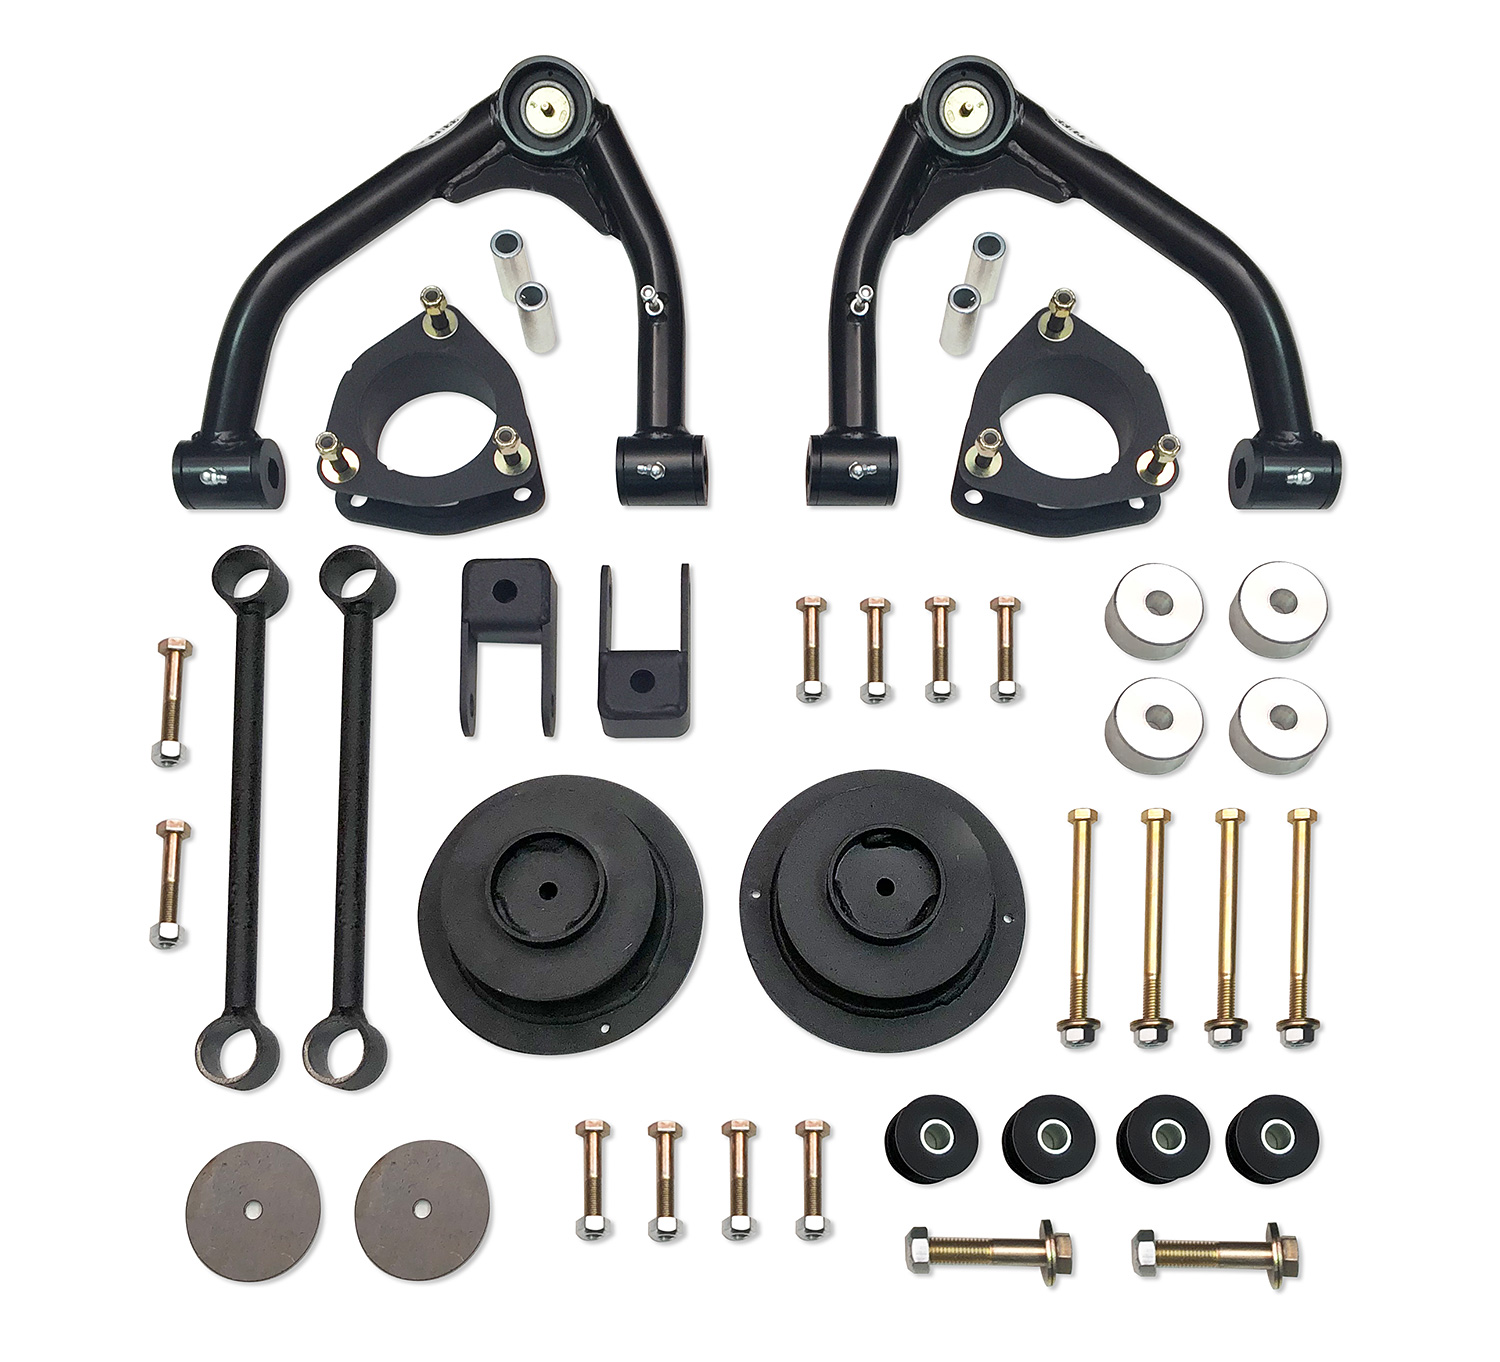 4 Inch Lift Kit 14-18 Chevy Suburban/Tahoe/Yukon XL/Yukon 1500 Fits Models w/aluminum factory Upper Control Arms or Two Piece Stamped Steel  Tuff Country